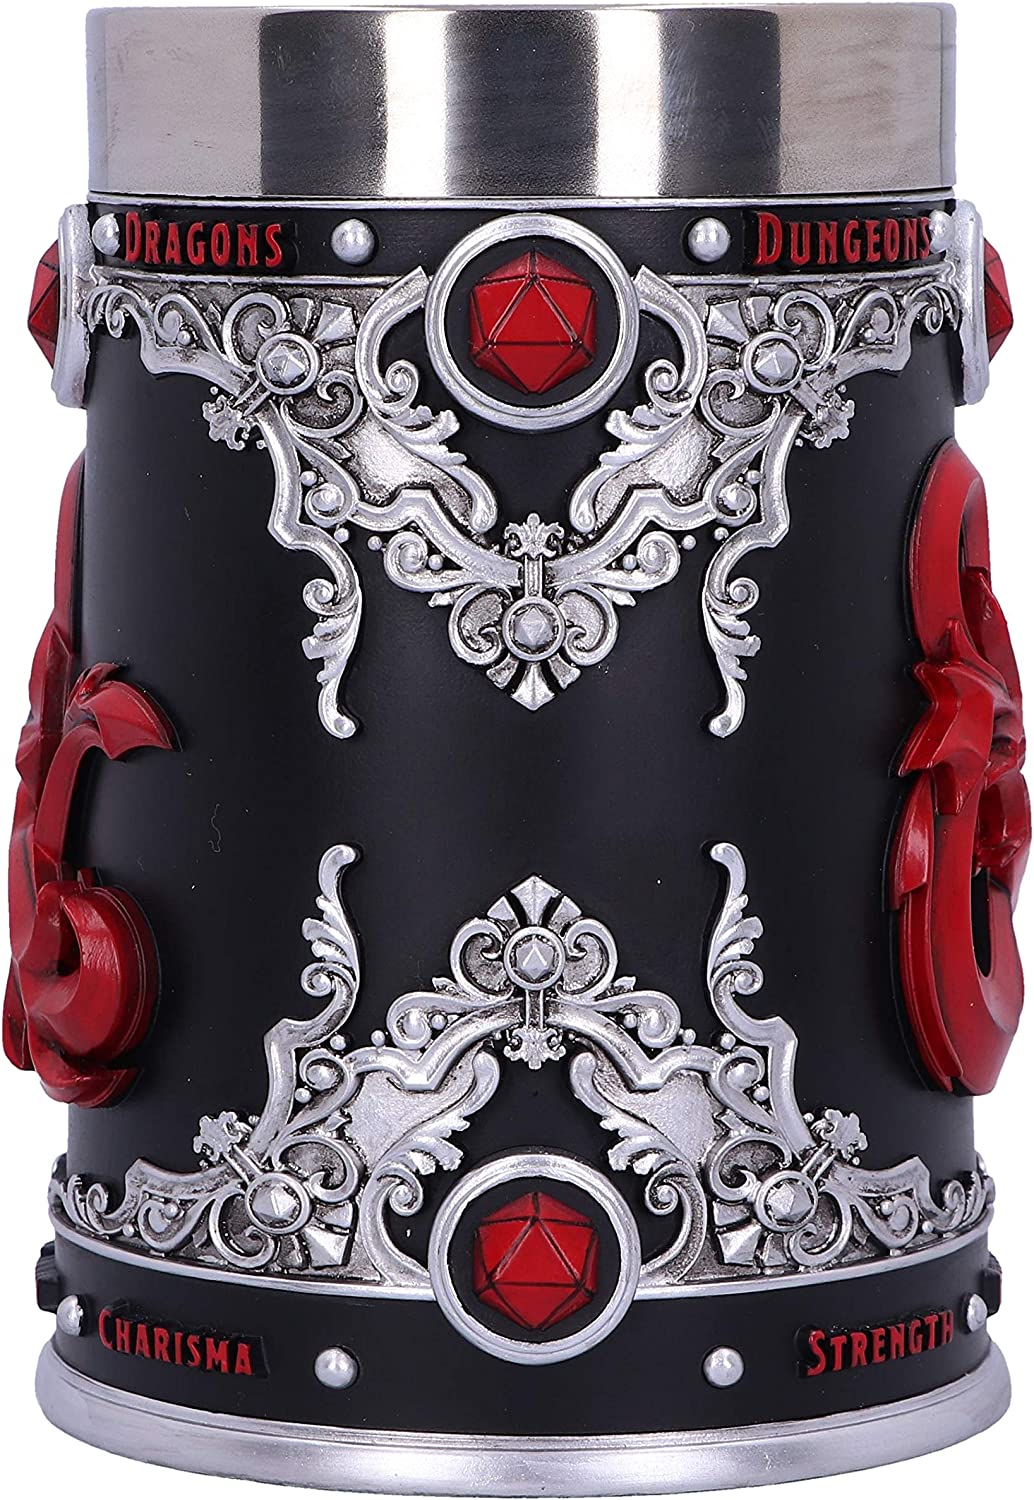 Nemesis Now Dungeons & Dragons Fantasy Role Play Die D20 Tankard, Rsine, acier inoxydable, Black, 1 Count (Pack of 1)